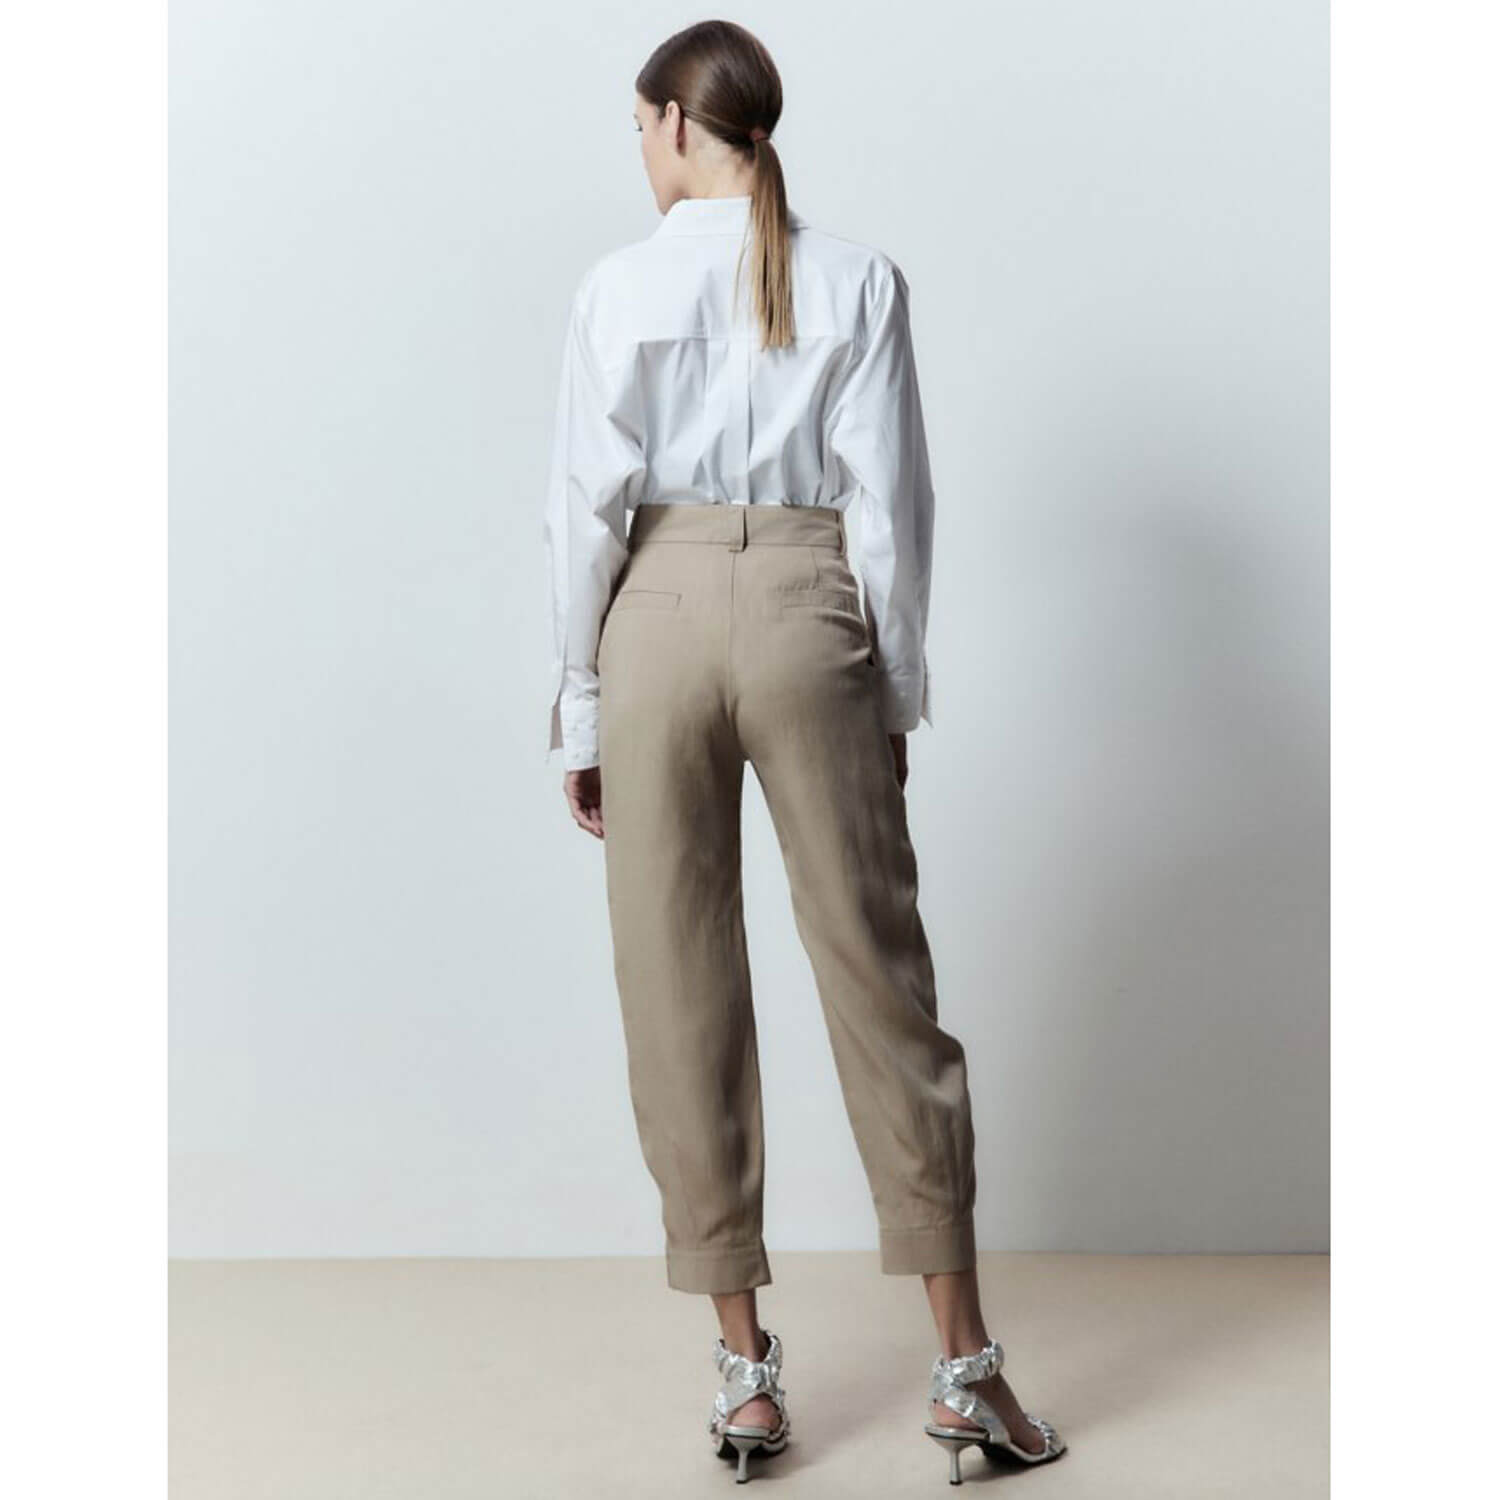 Sfera Flowy trousers 4 Shaws Department Stores